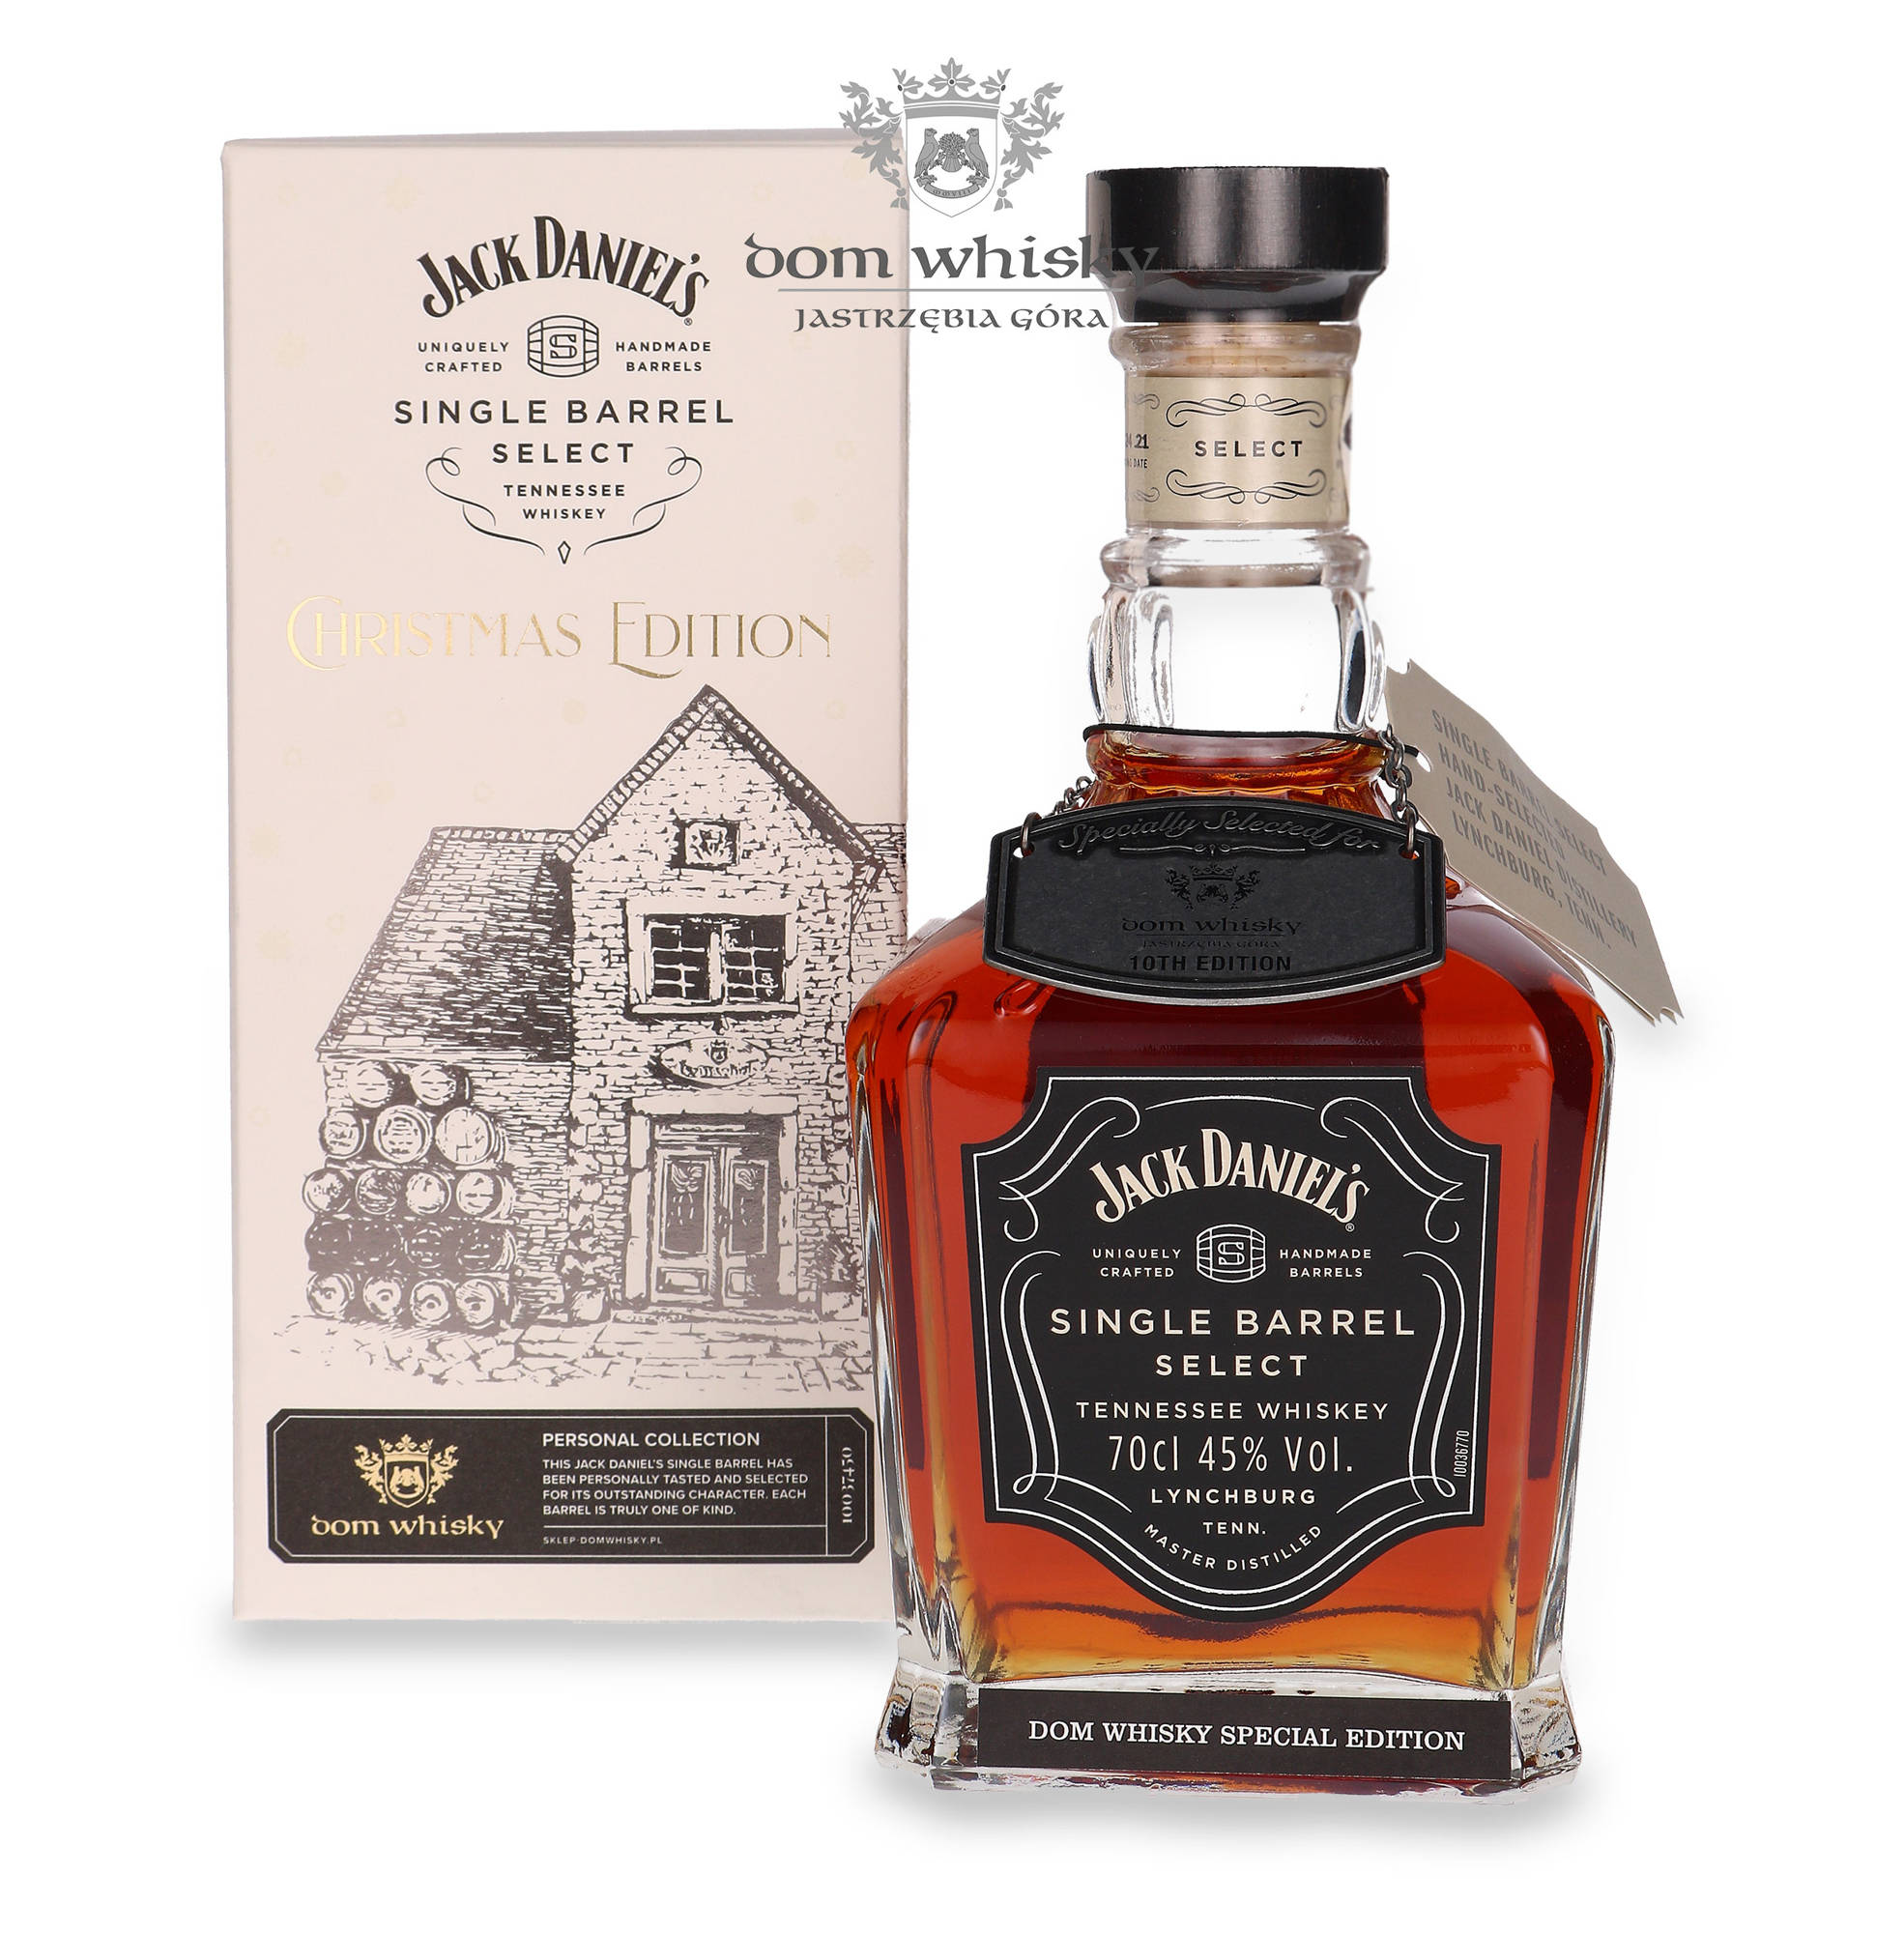 Jack Daniel's Single Barrel Dom Whisky Collection 10th Edition / 45% / 0,7l  | Dom Whisky